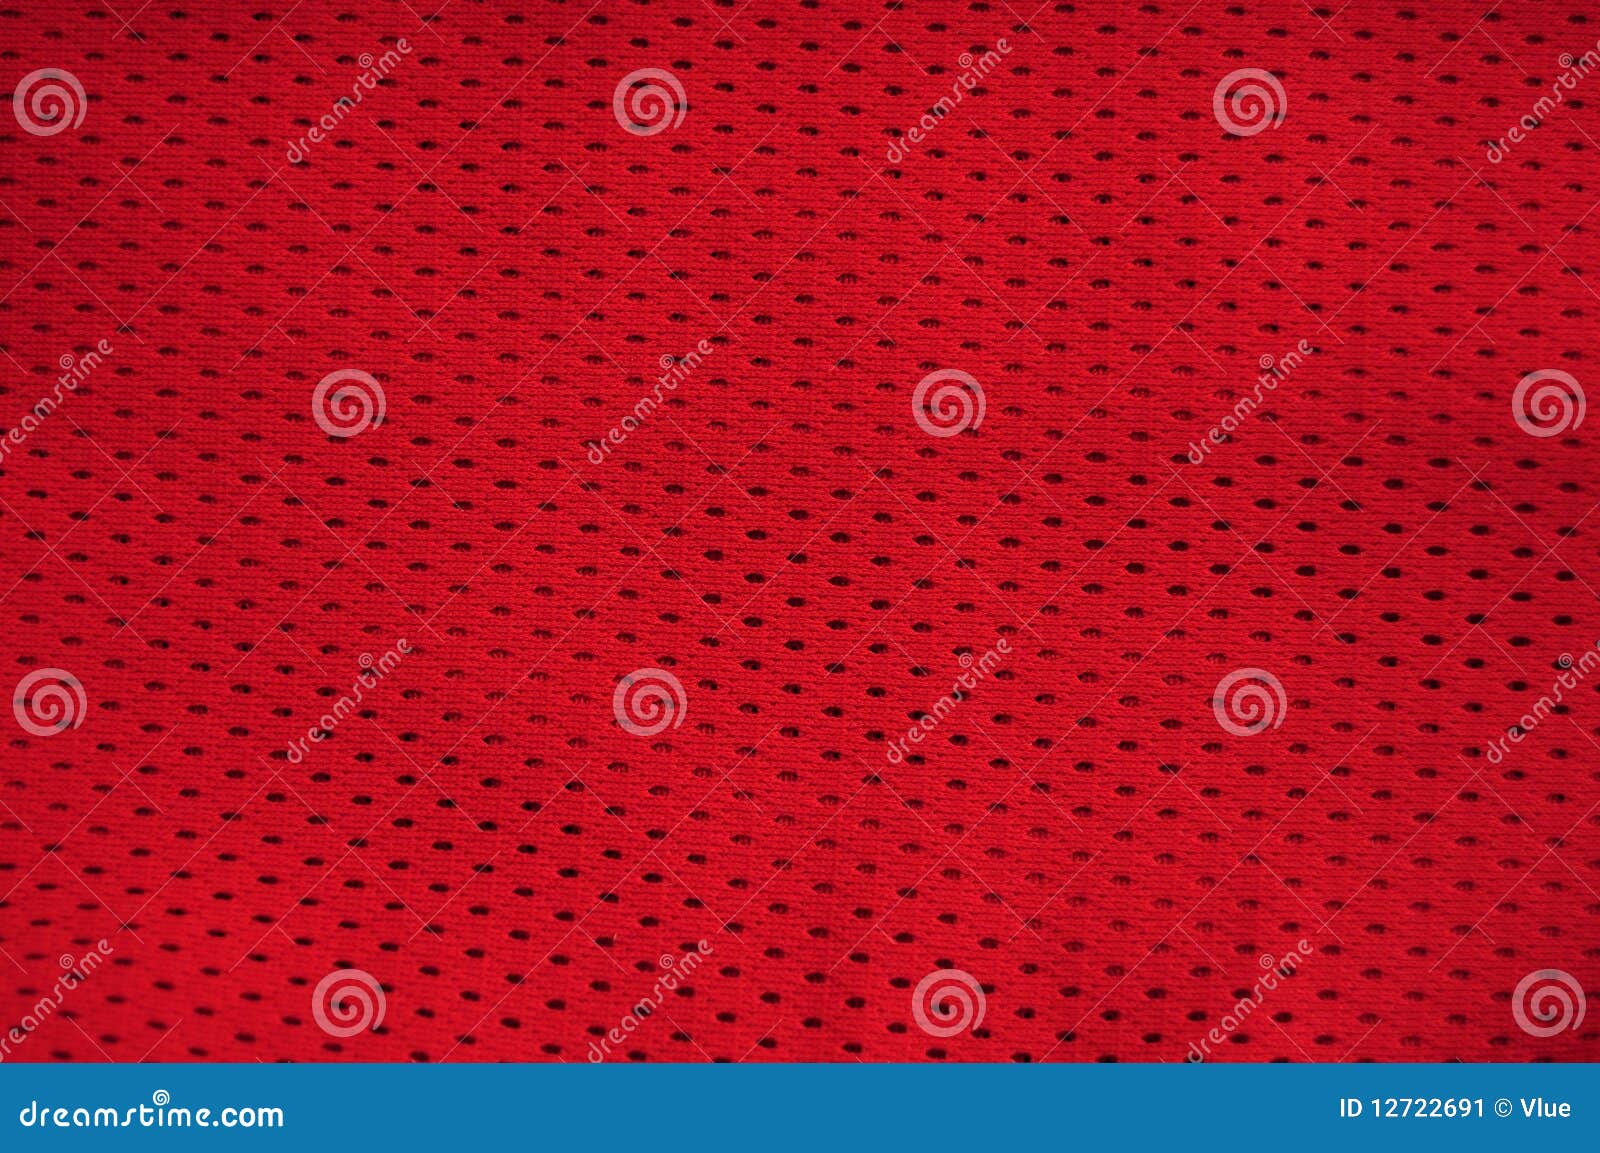 16,790 Red Jersey Pattern Images, Stock Photos, 3D objects, & Vectors